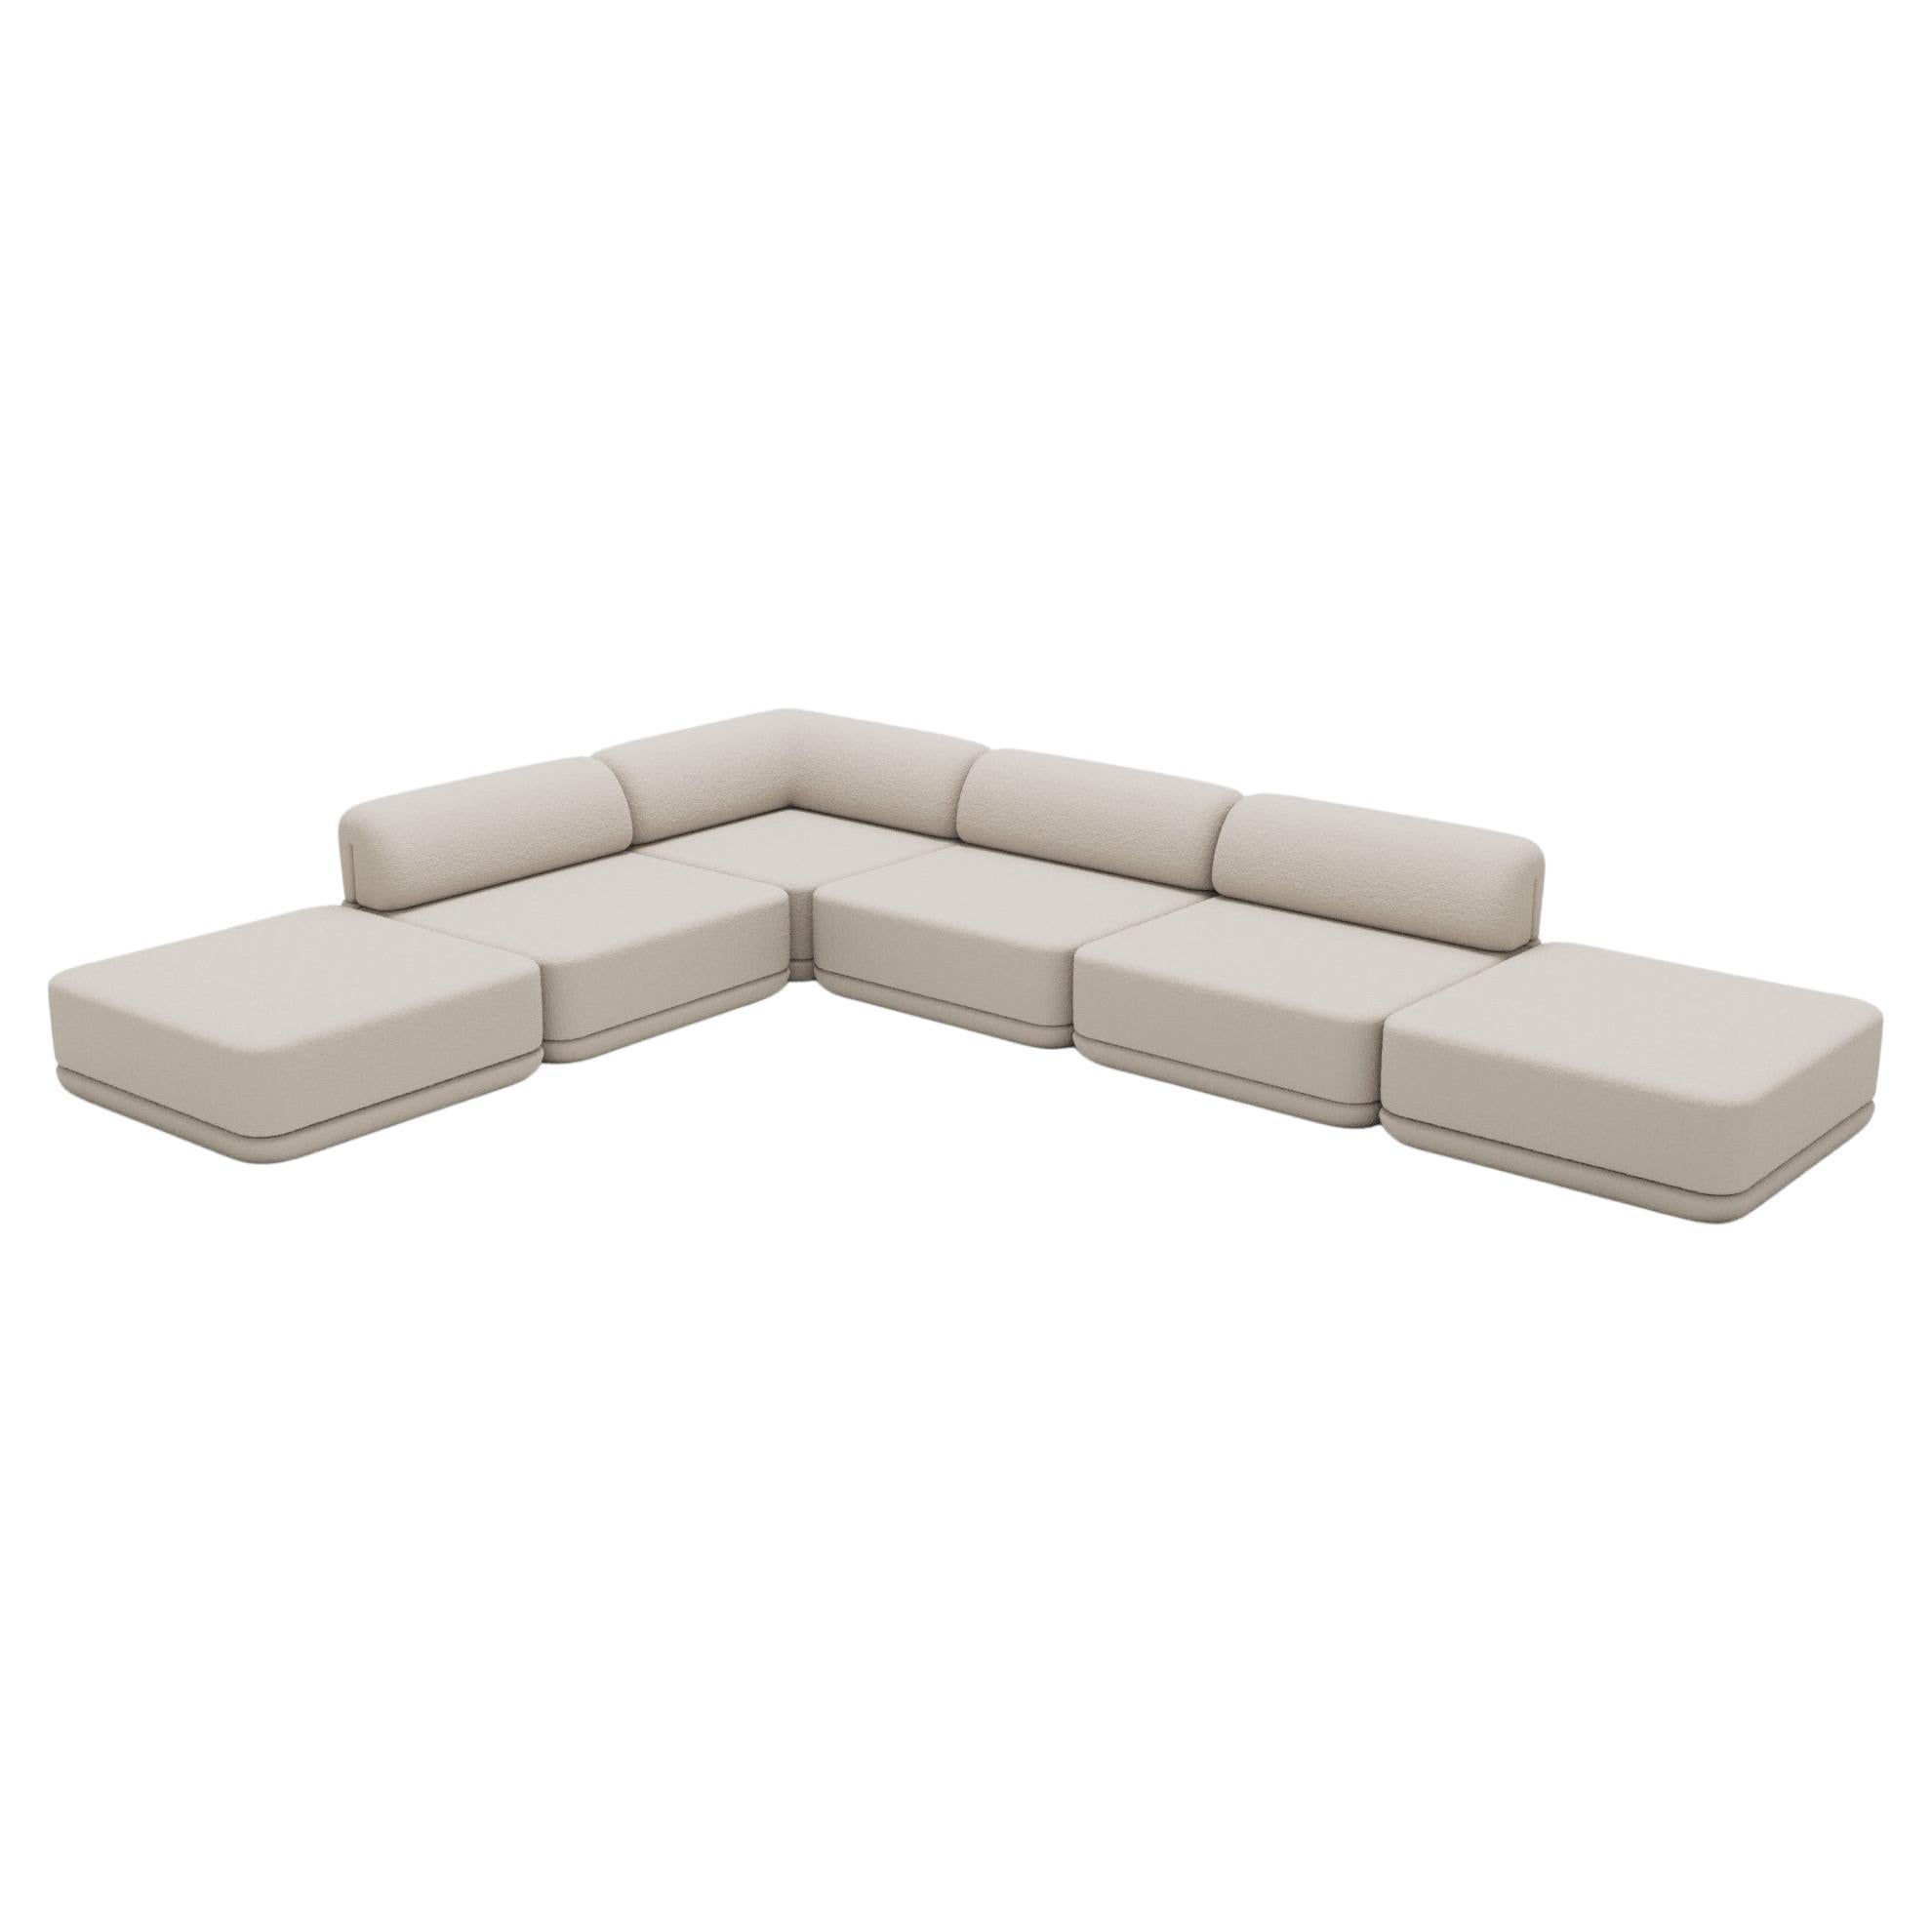 The Cube Sofa - Corner Lounge Ottoman Mix Sectional For Sale